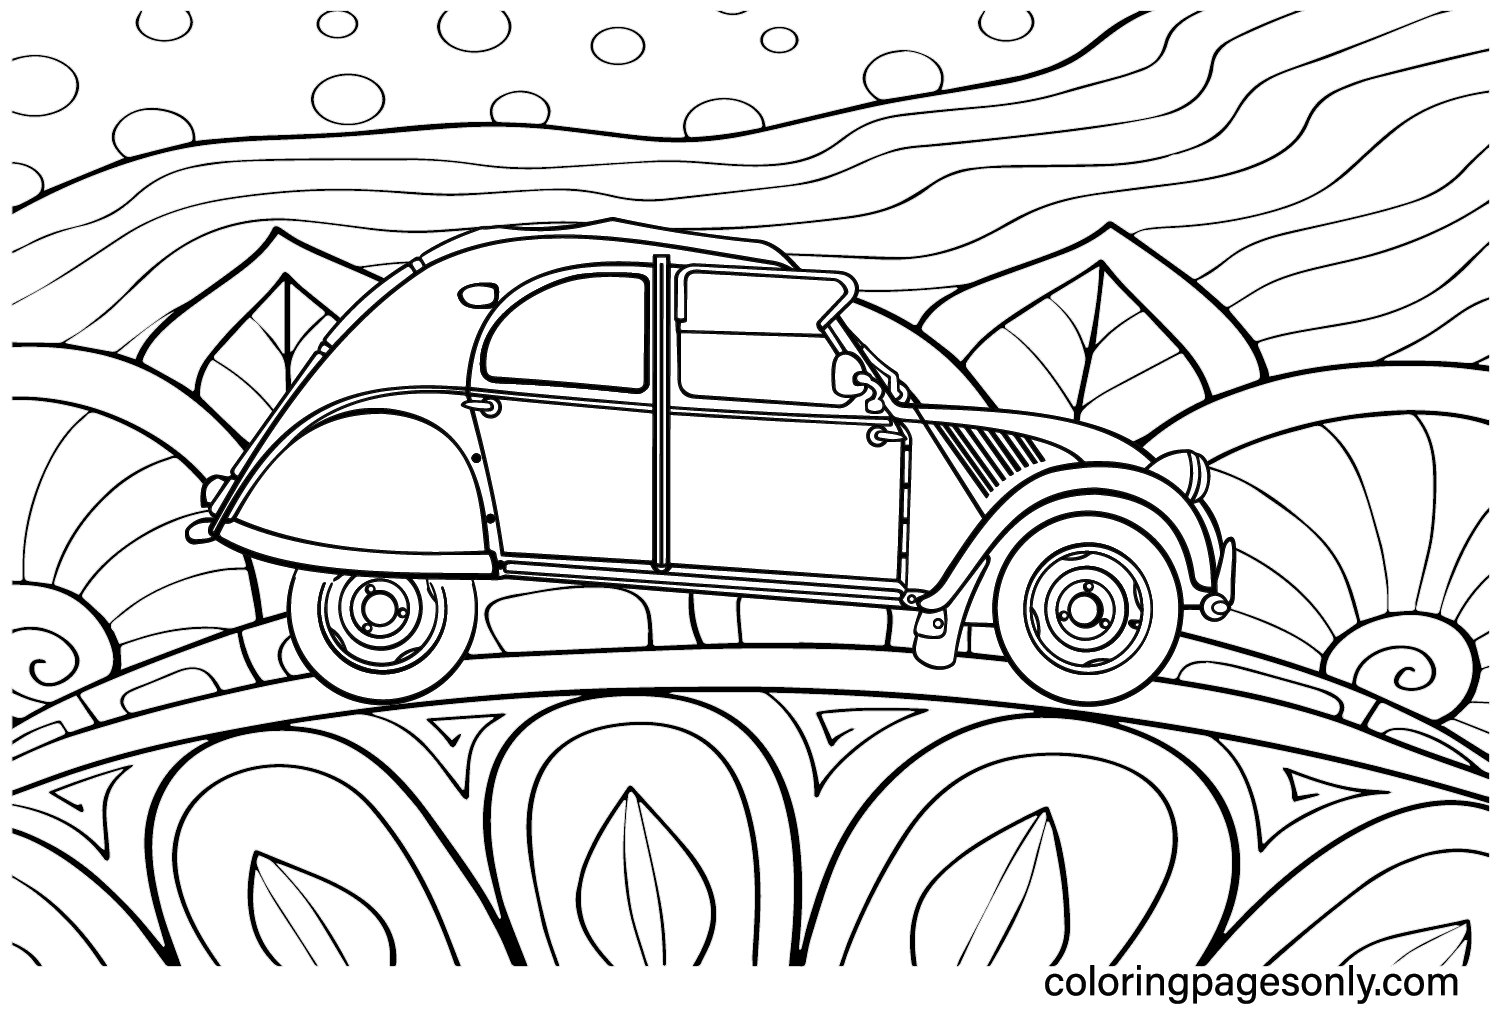 Citroën 2CV Coloring Page from Citroën